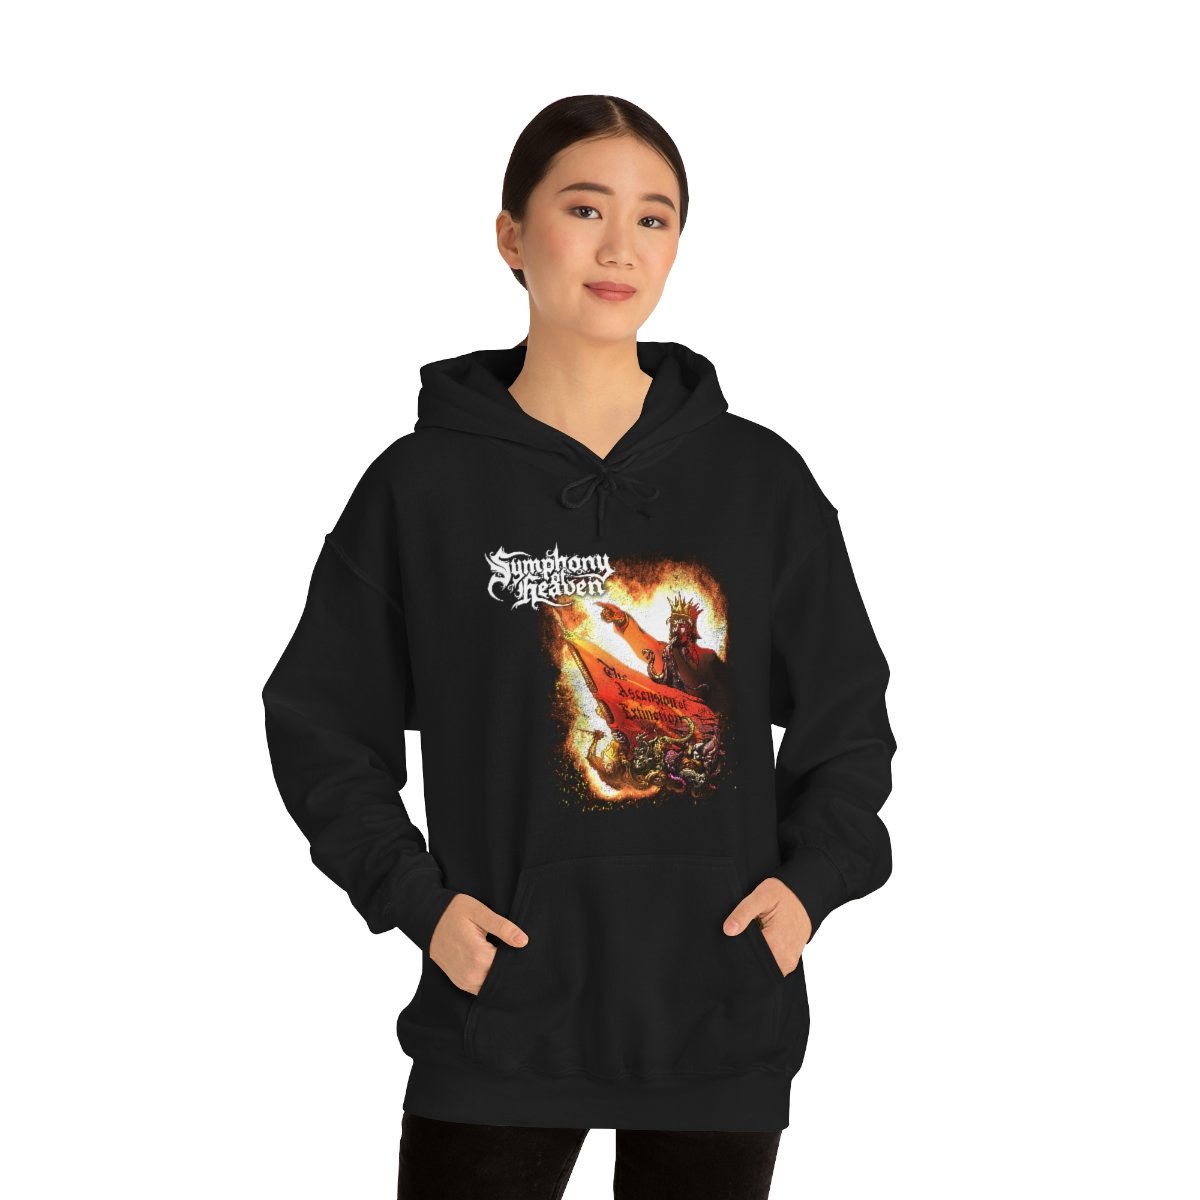 Symphony of Heaven – The Ascension of Extinction Pullover Hooded Sweatshirt (18500)